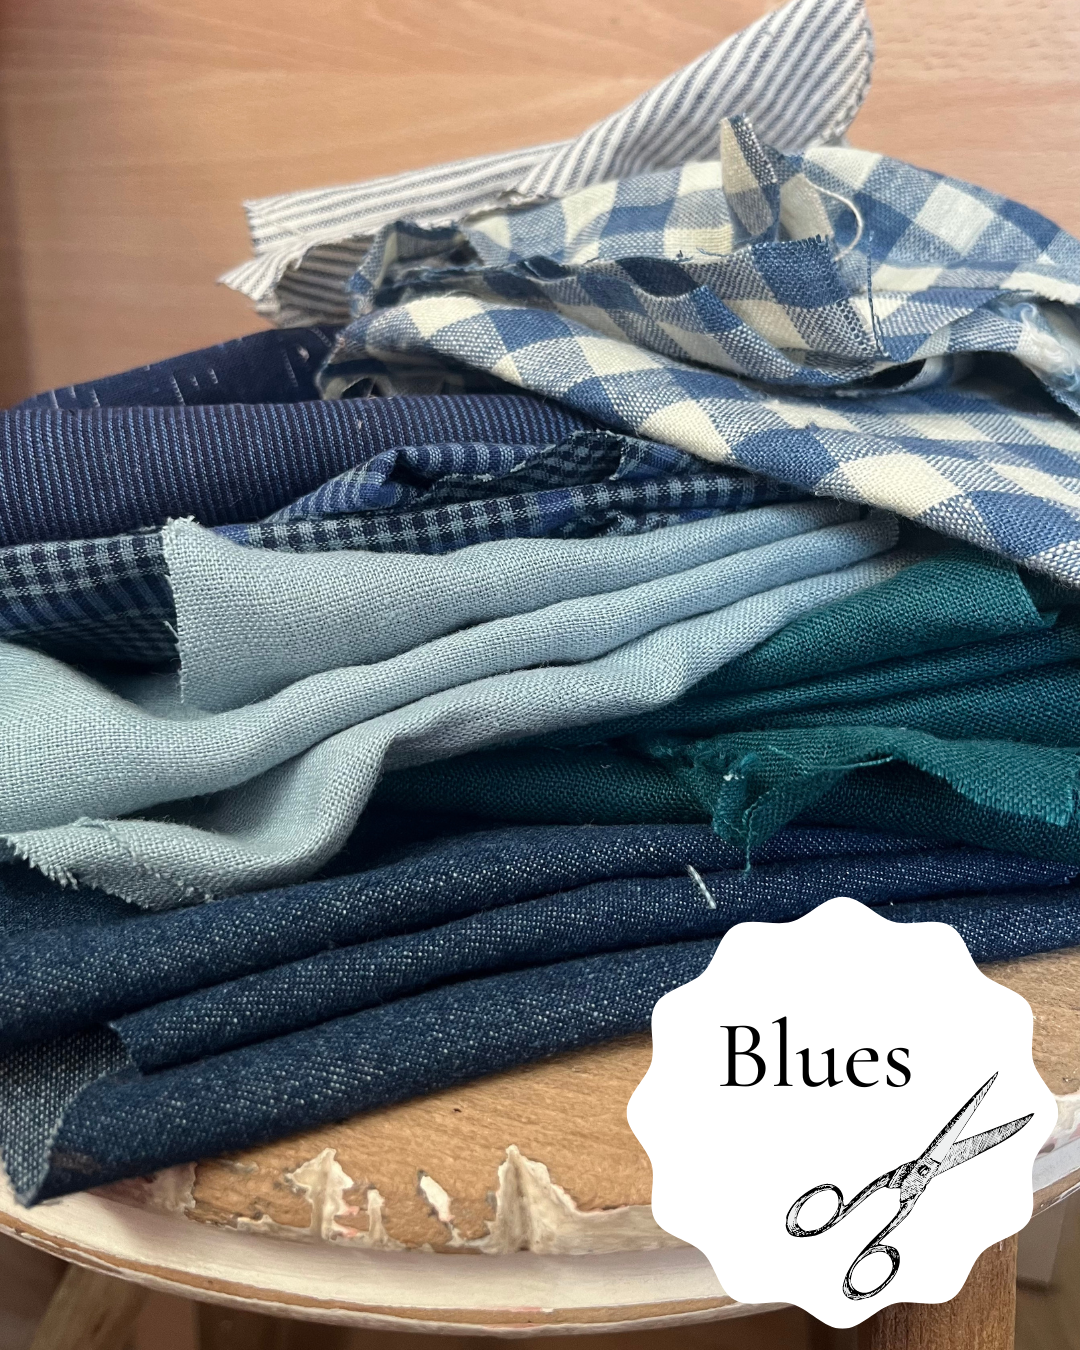 A collection of premium scraps for zero waste sewing projects. All blues.